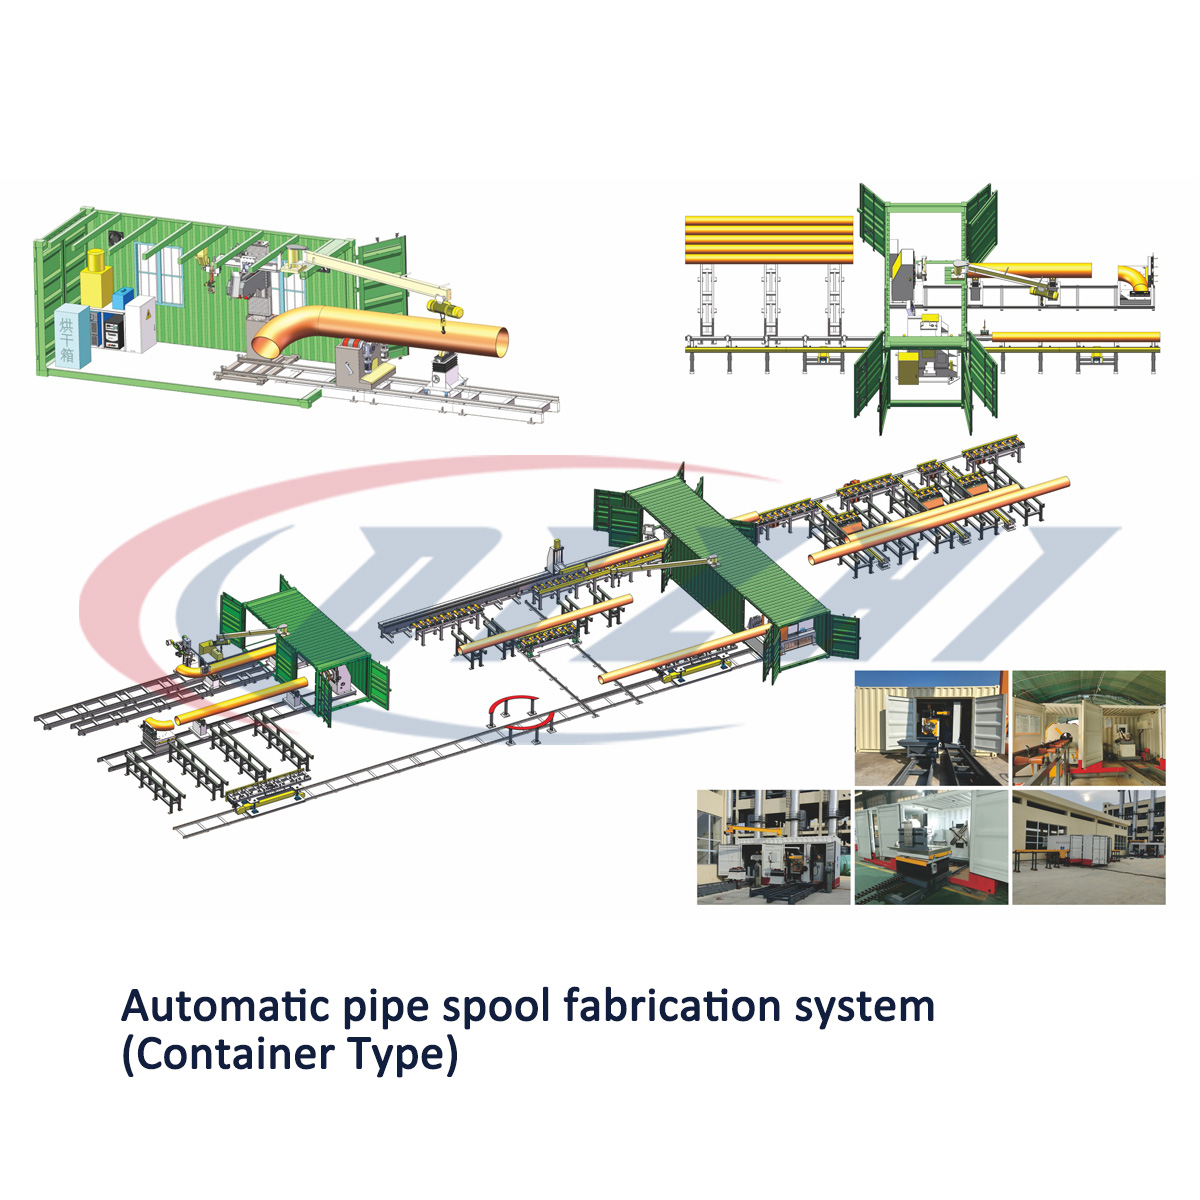 Pipe Spool Fabrication System (Container Type)